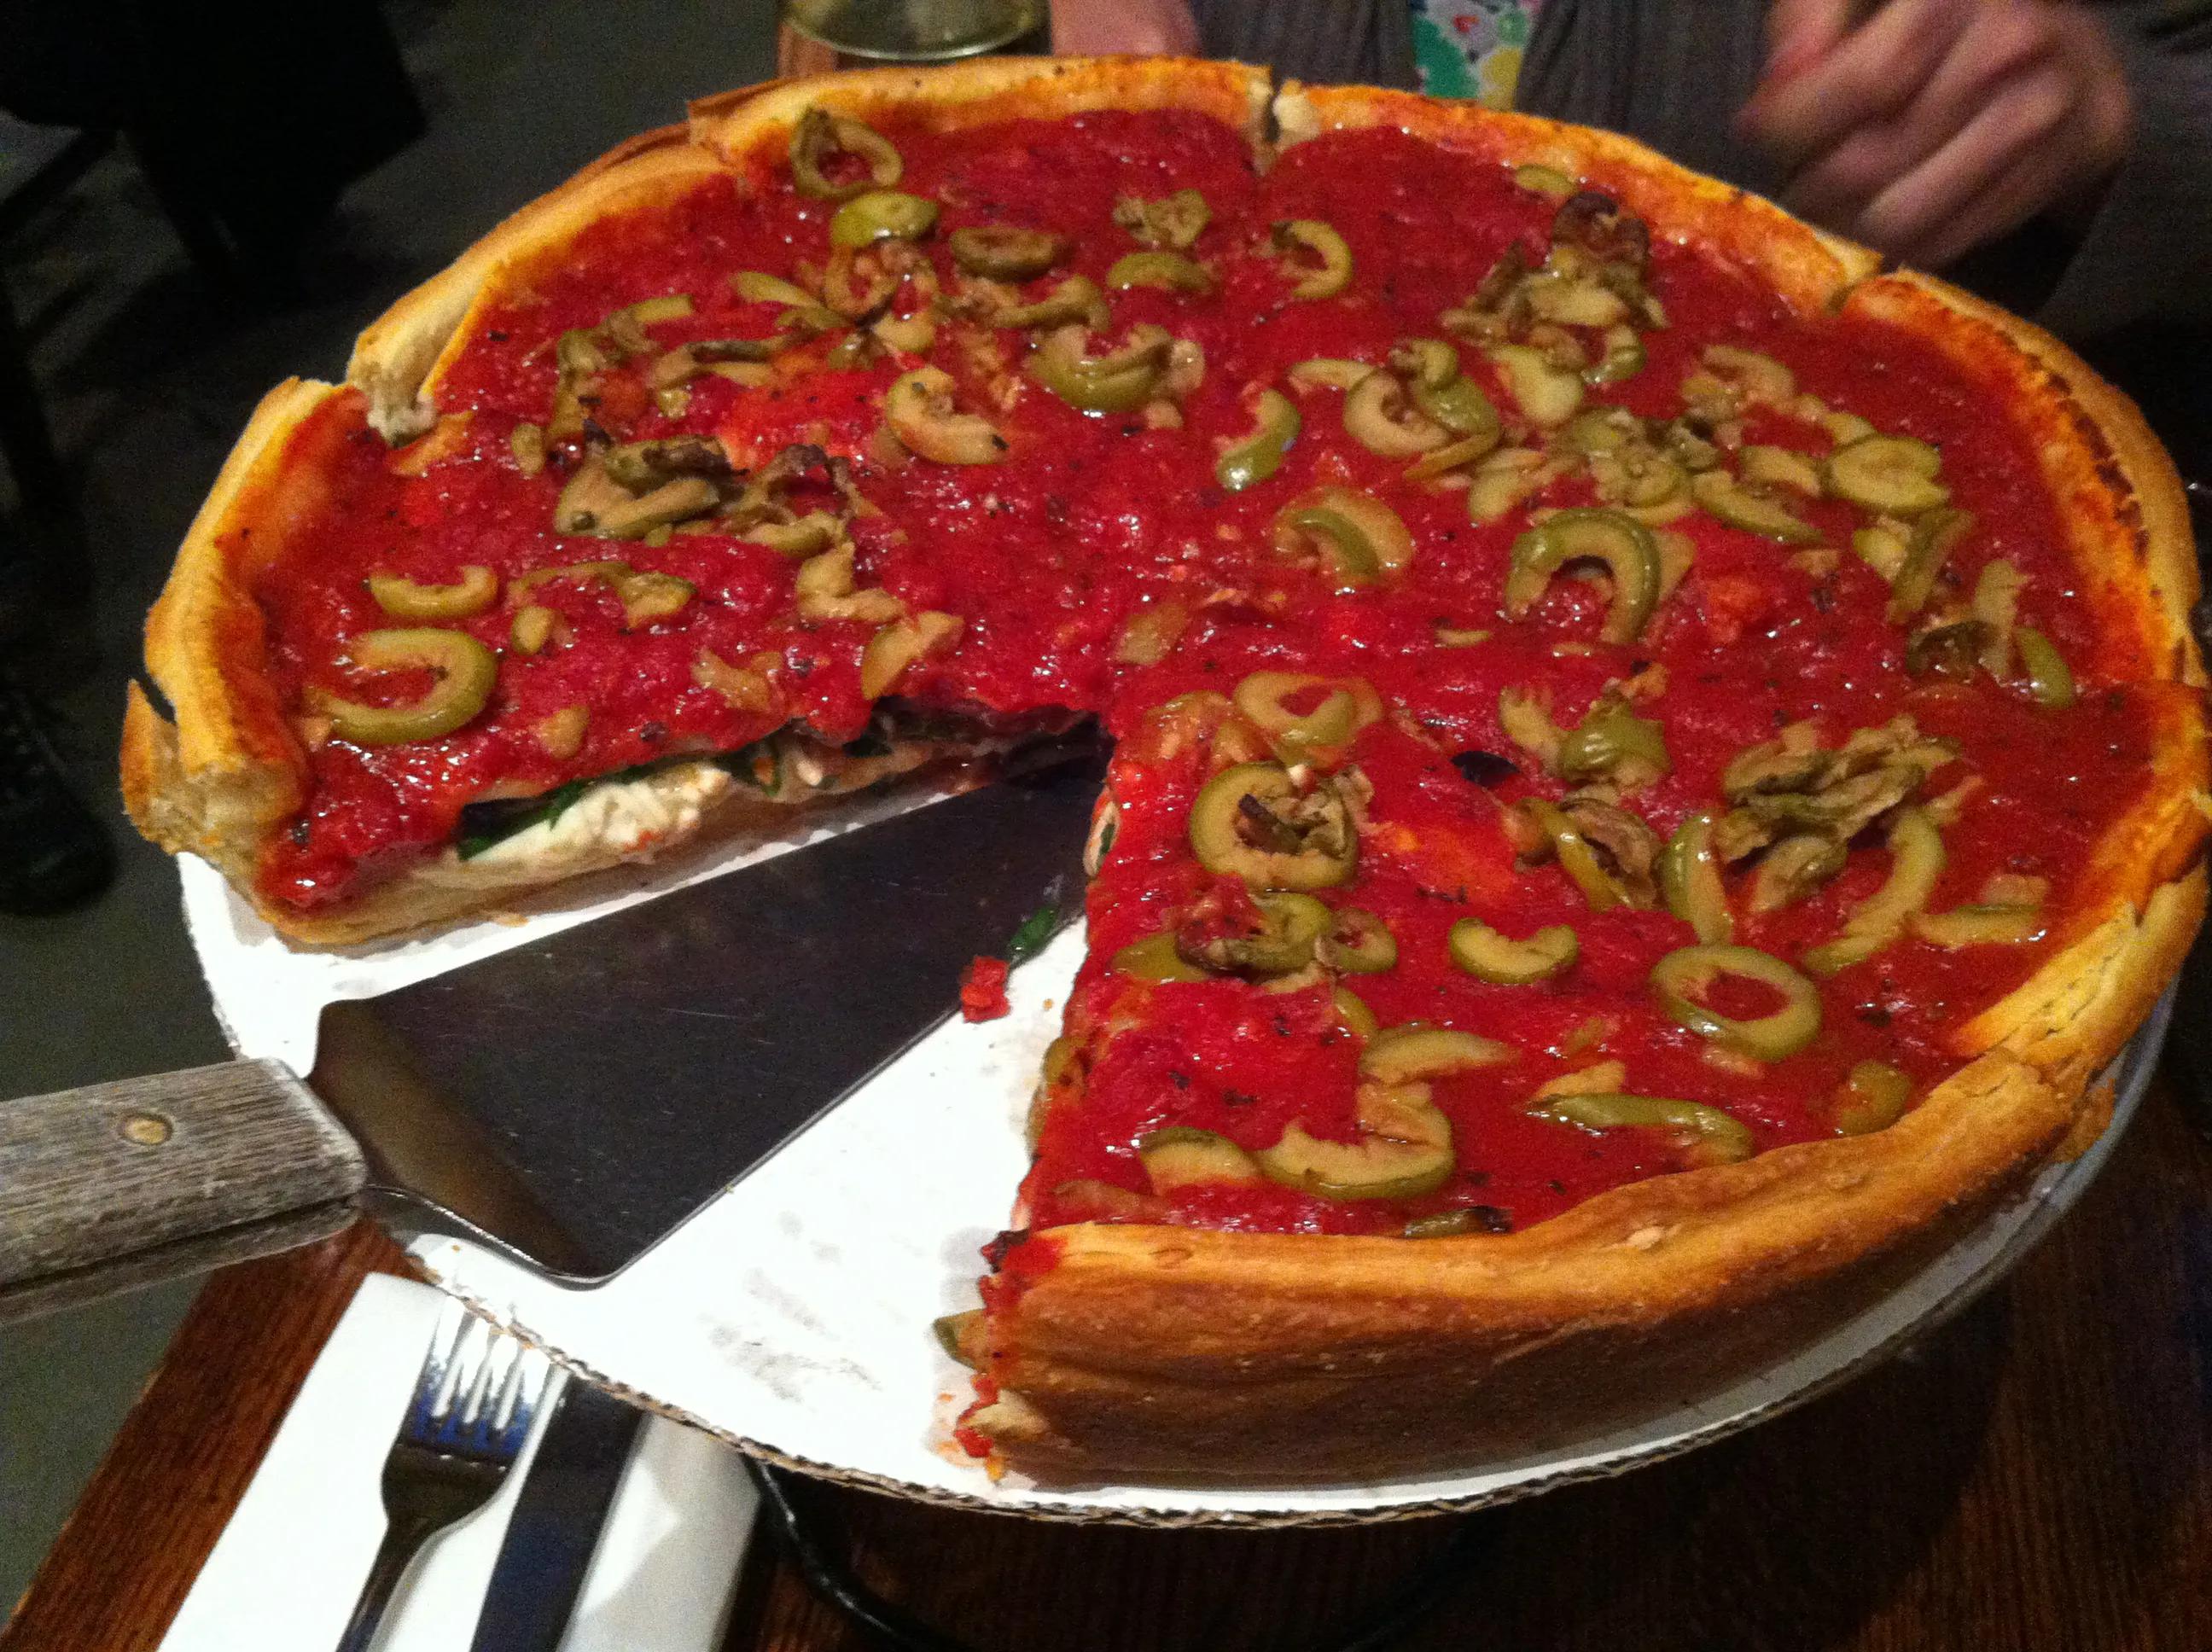 File:Paxtis Chicago Style Deep Dish Pizza.jpg - Wikimedia Commons